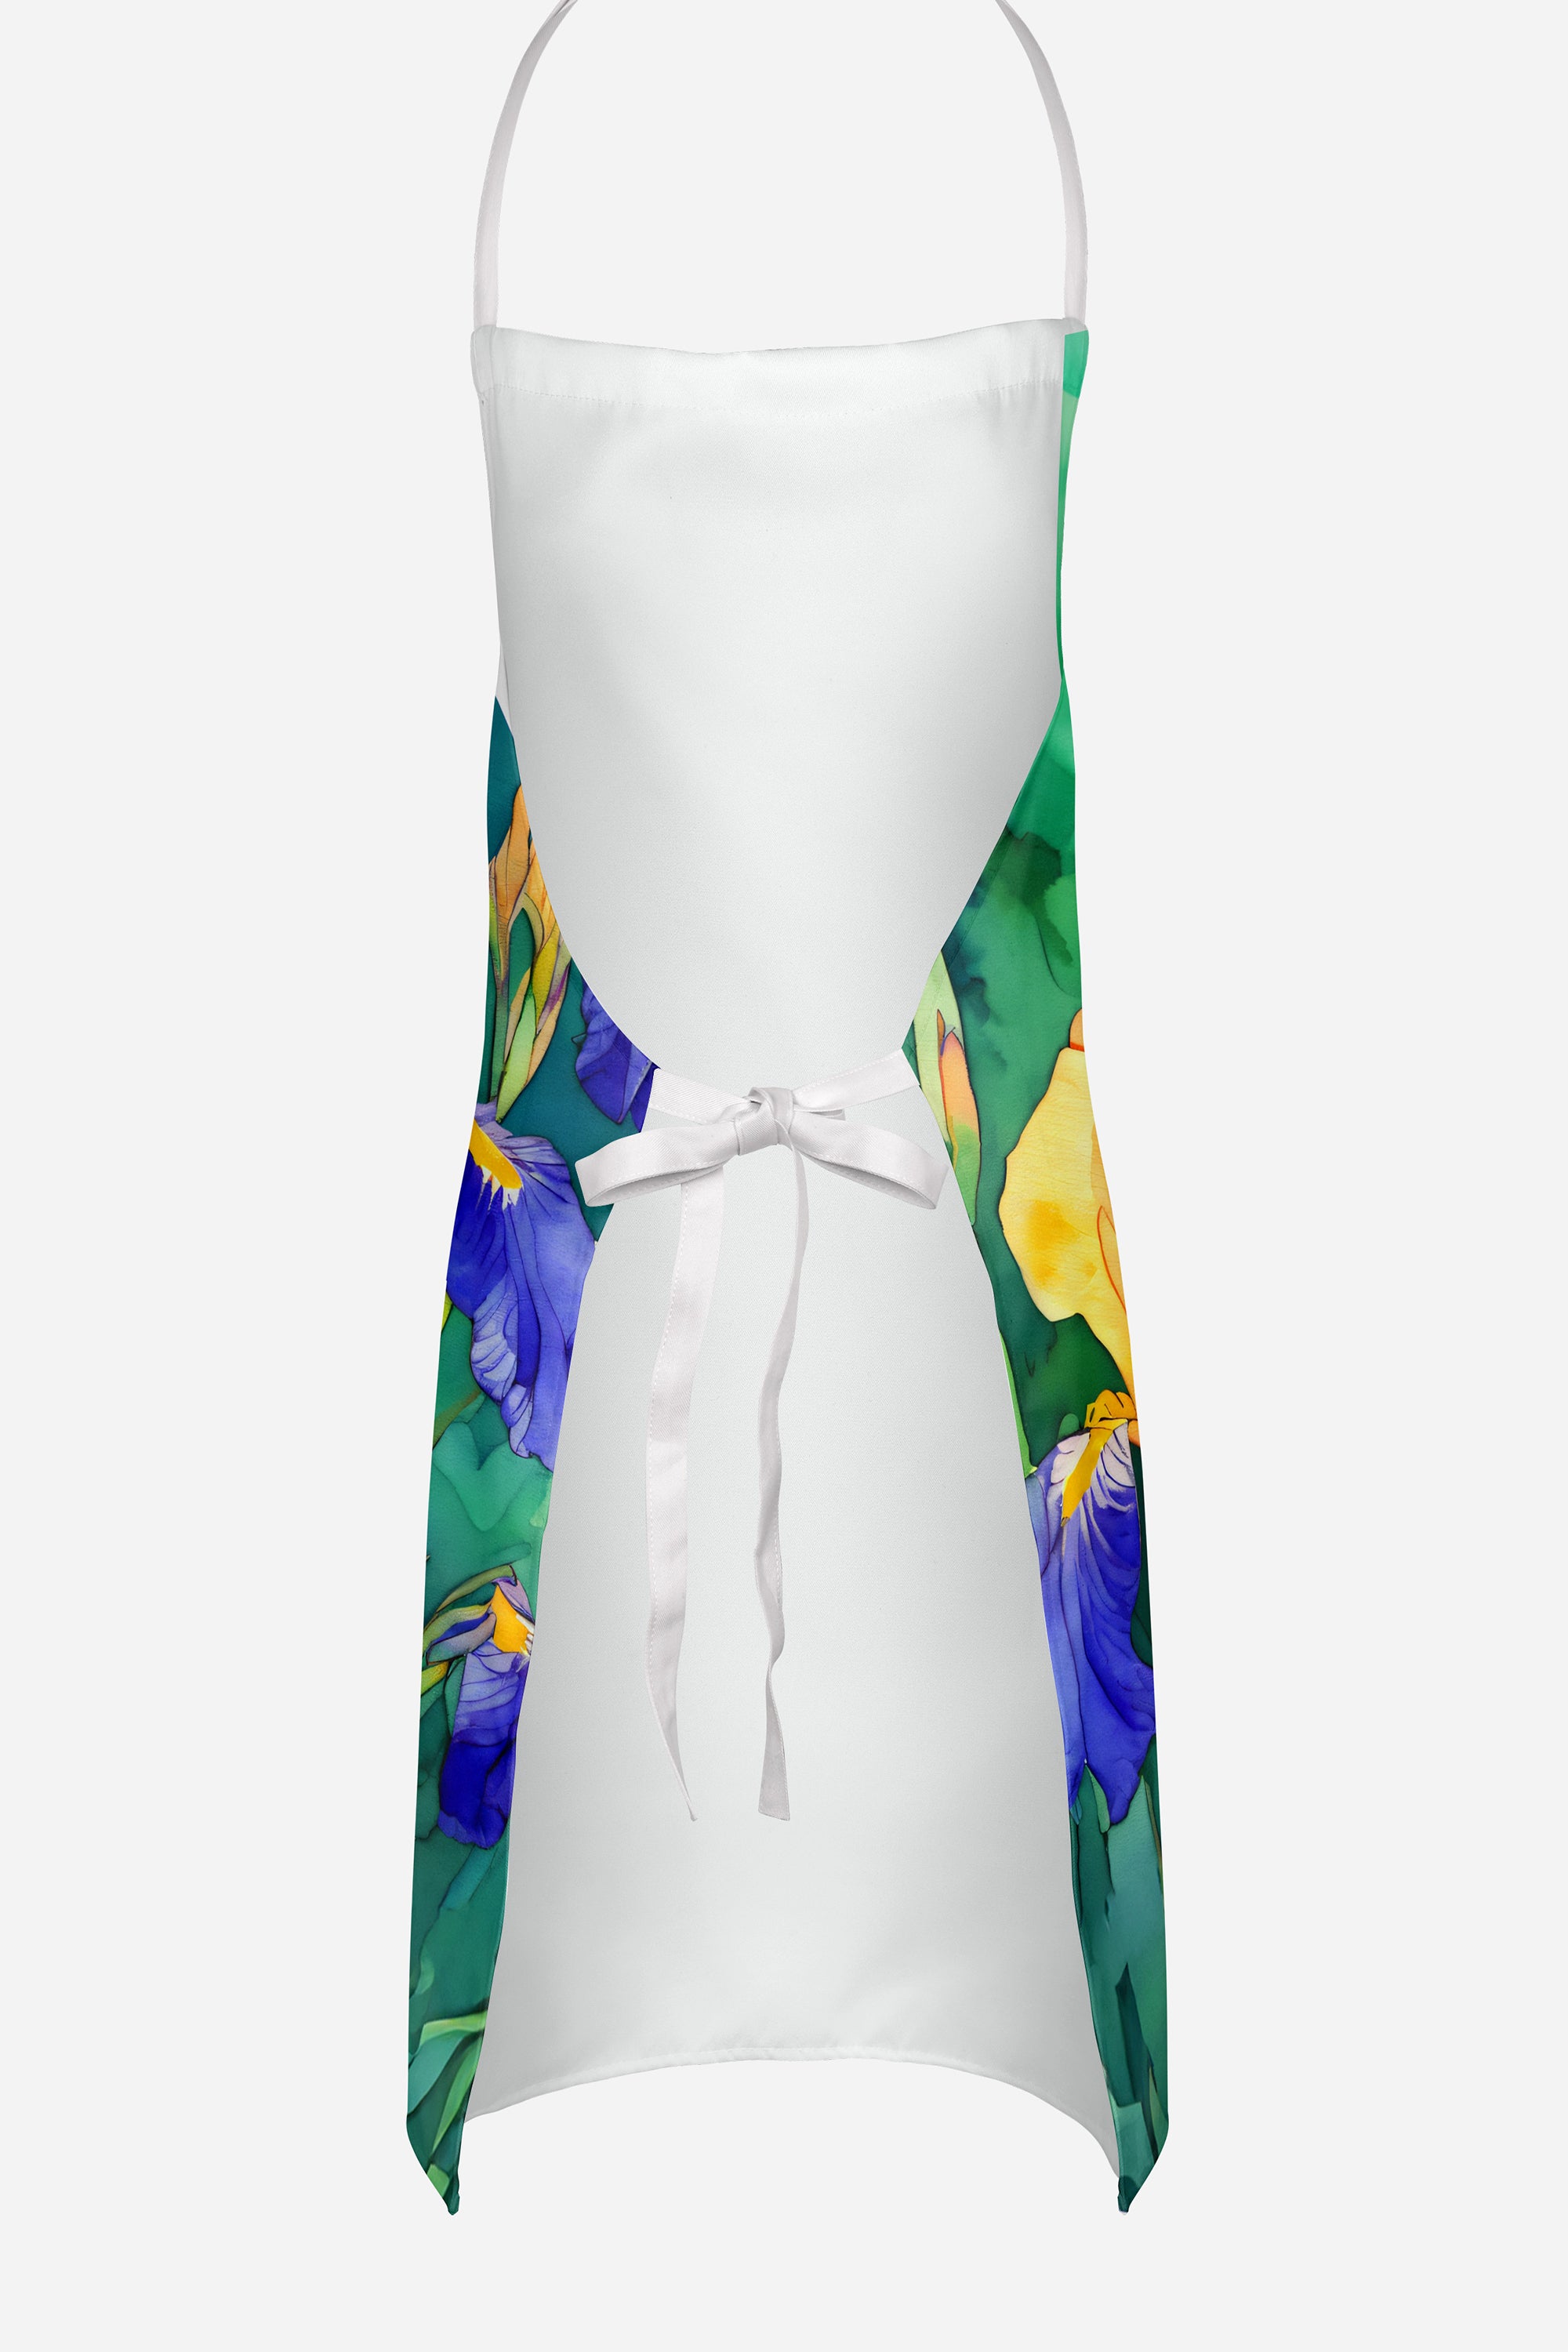 Tennessee Iris in Watercolor Apron